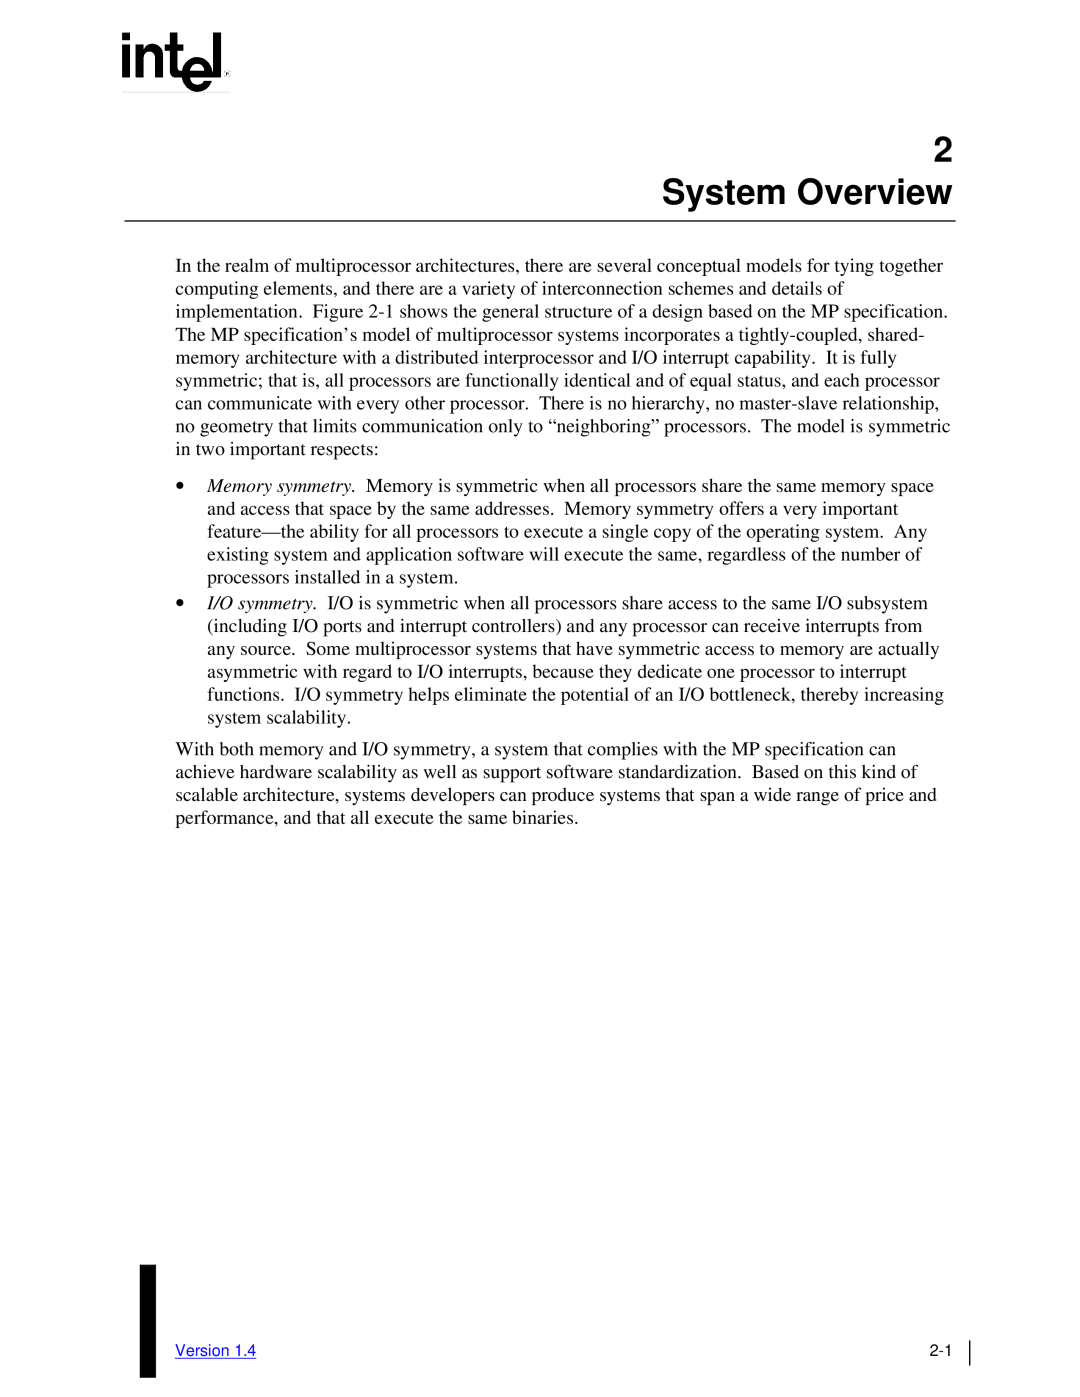 Intel MultiProcessor manual System Overview, Version 